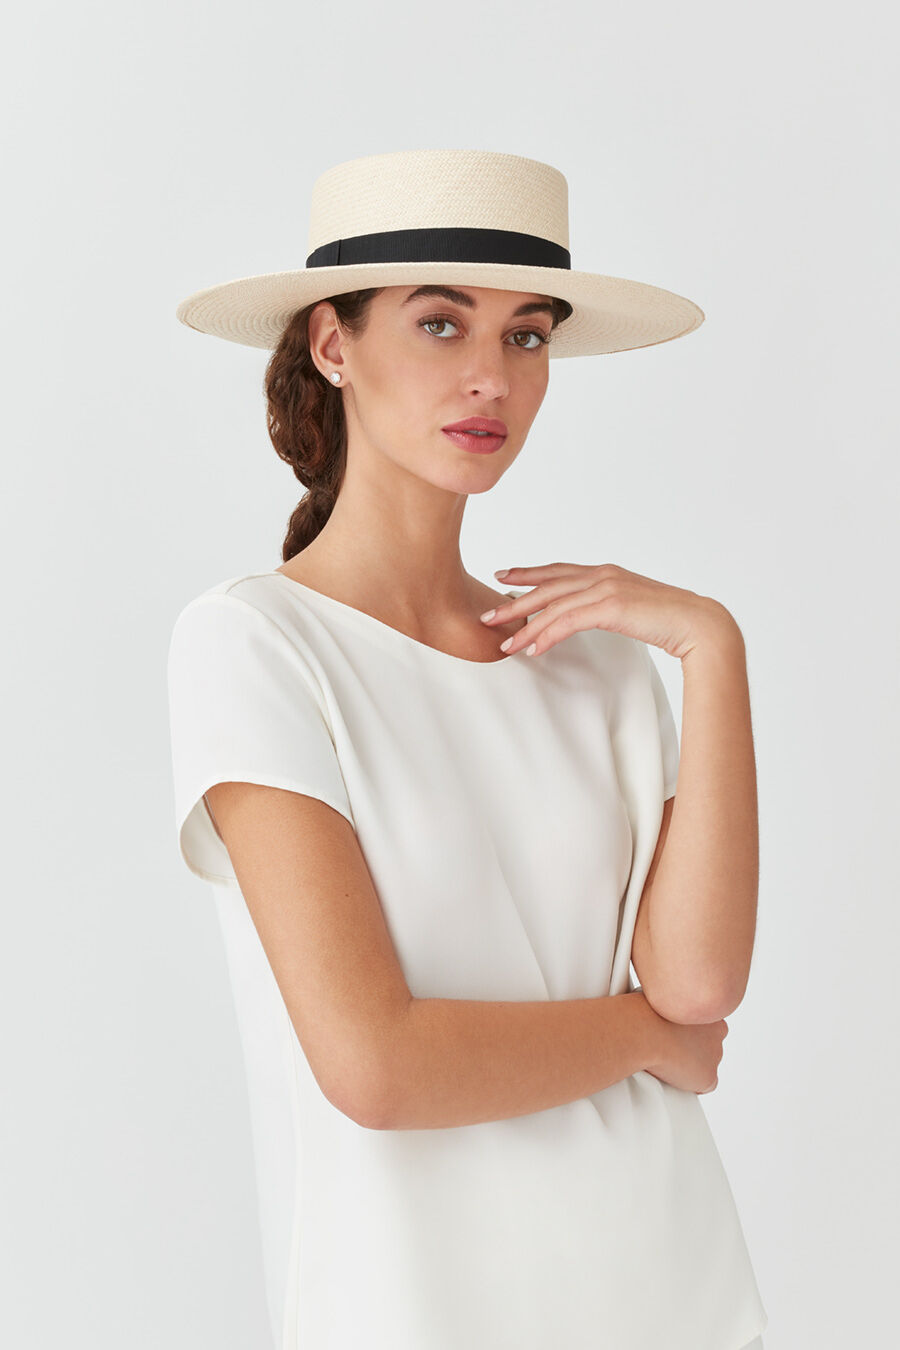 Woman wearing a wide-brimmed hat and a blouse, posing with hand on neck.